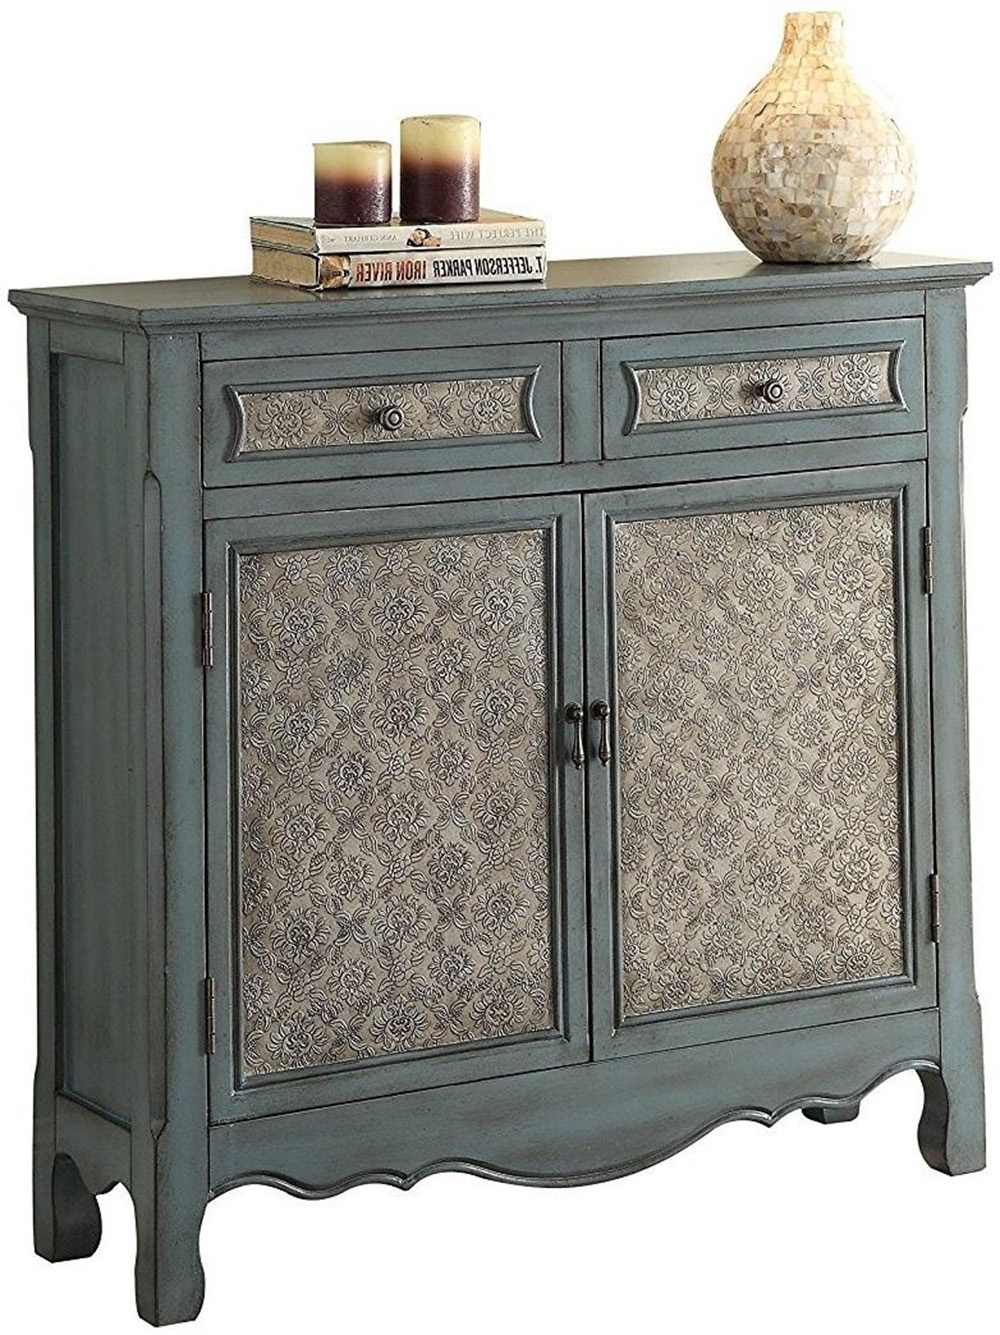 ACME Winchell 36" Wooden Console Table with 2 Storage Drawers, and 2 Doors, for Entrance, Hallway, Dining Room, Kitchen - Blue